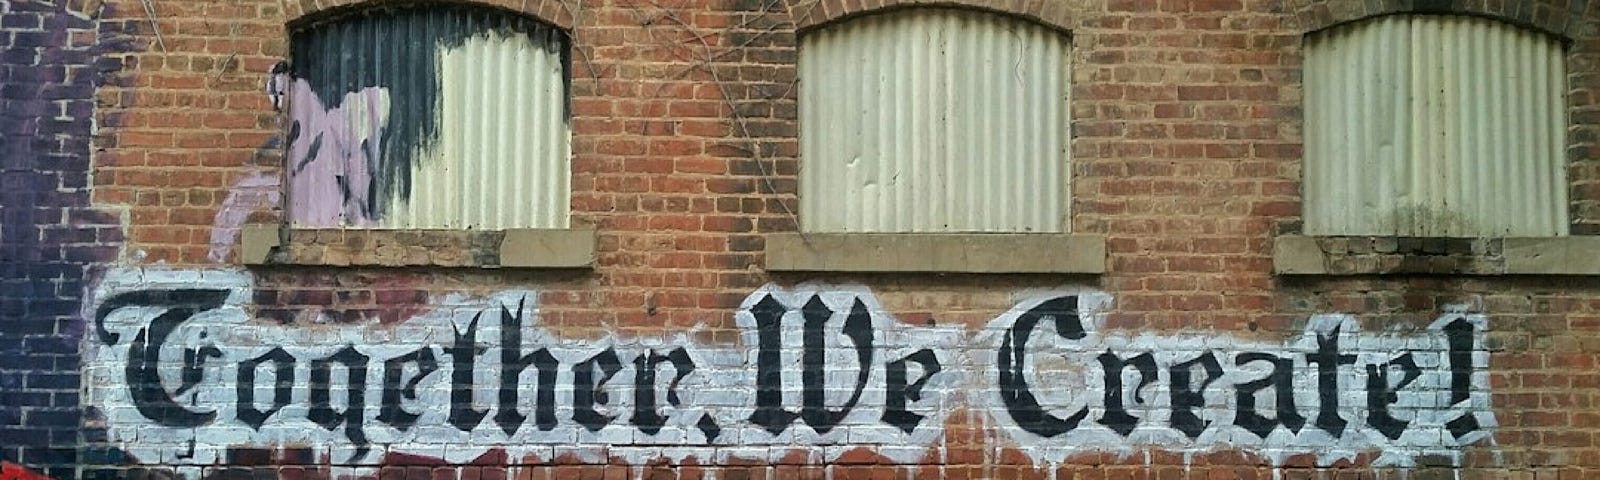 A painted sign on the side of a brick building that says, “Together We Create!”